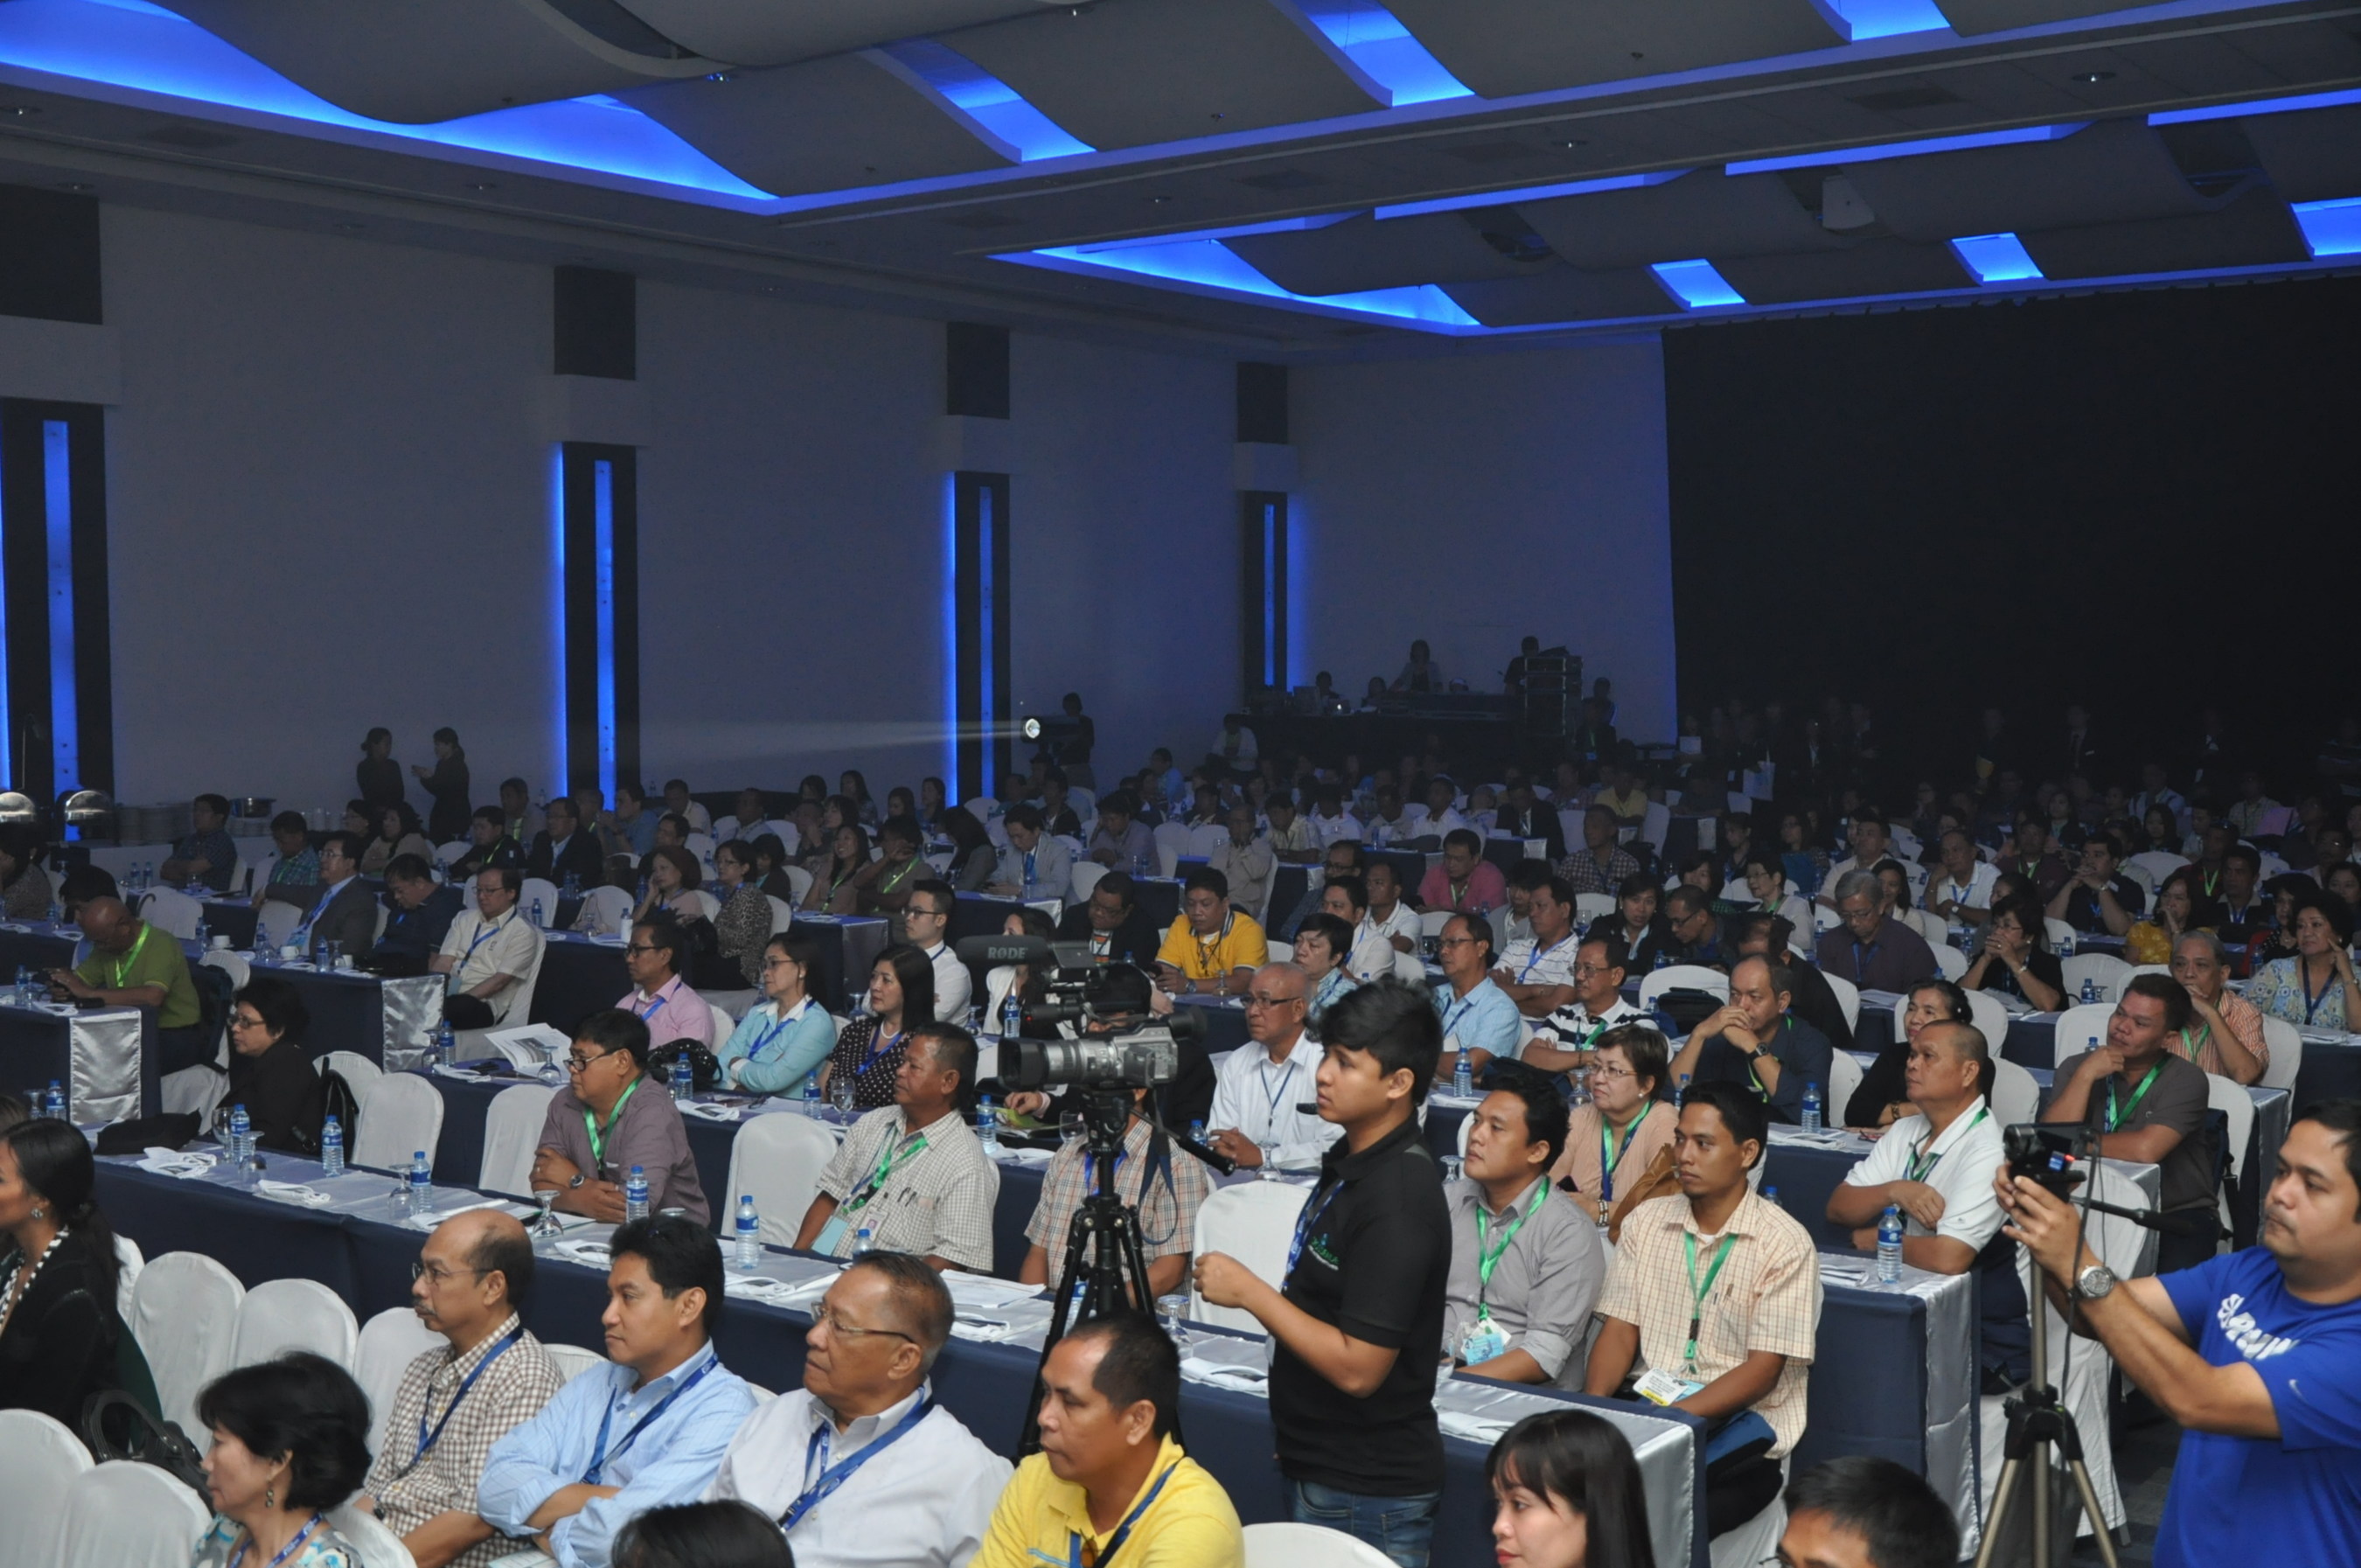 Full house Conference by Philippine Water Works Association (PWWA) at Water Philippines 2013